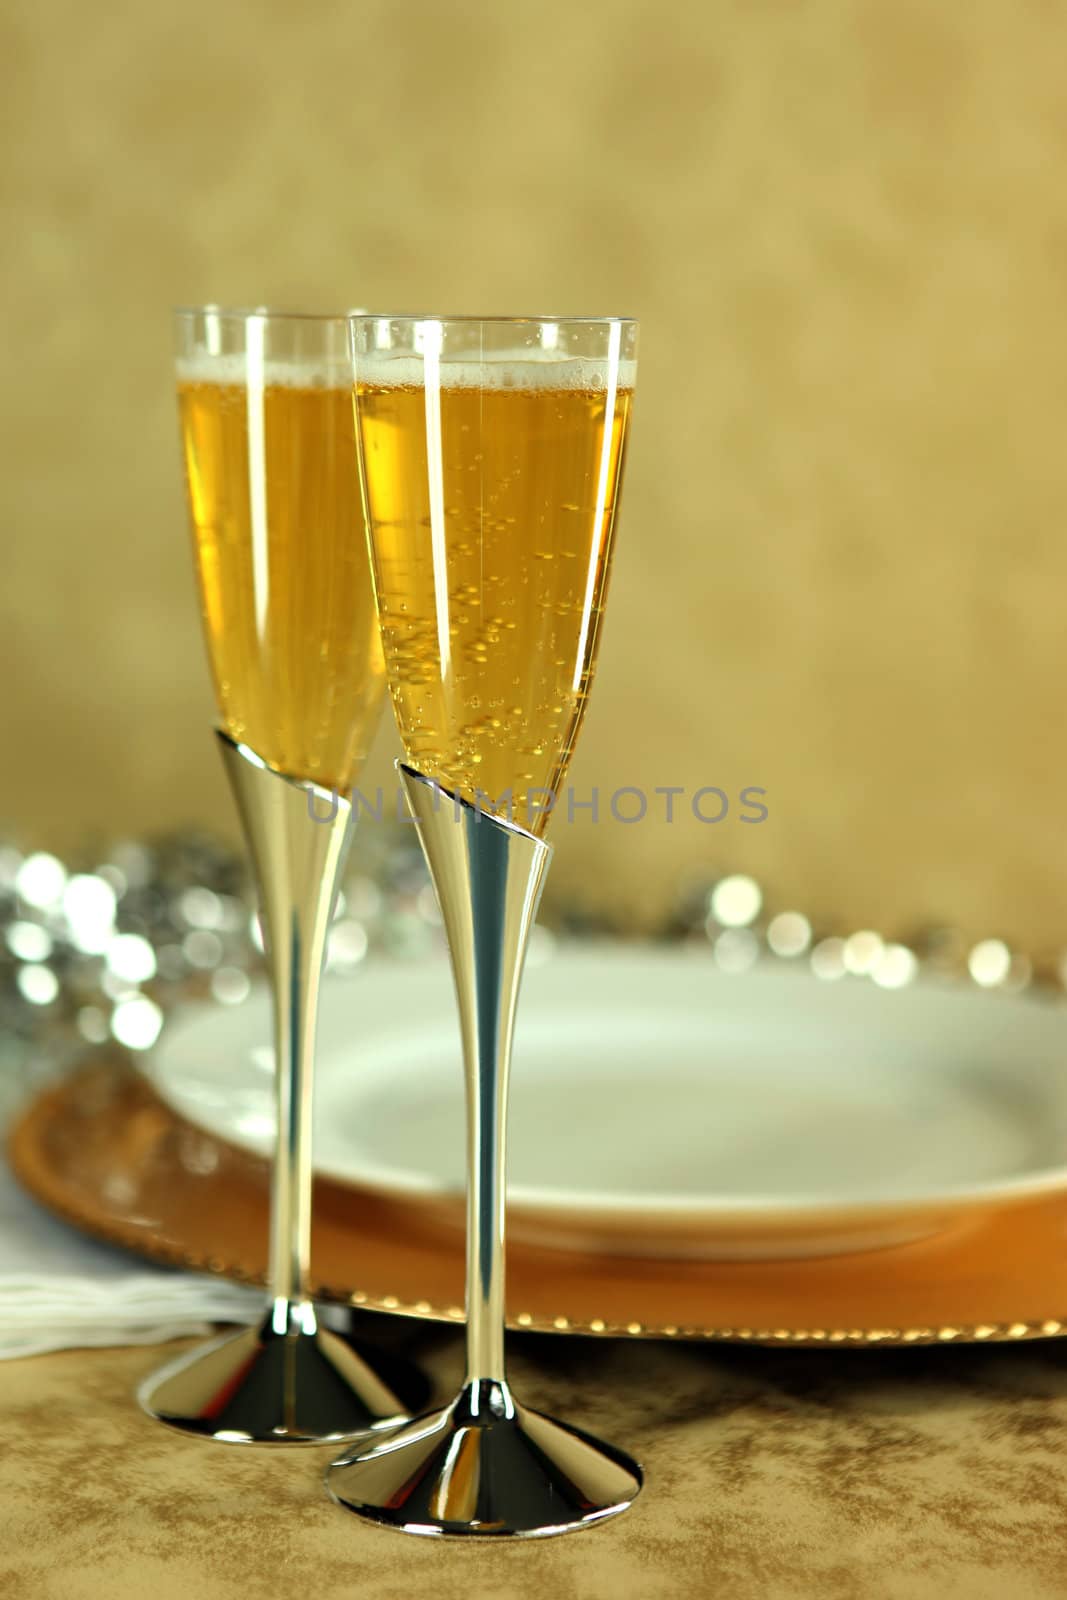 Pair of Champagne Flutes With With a Golden Hue